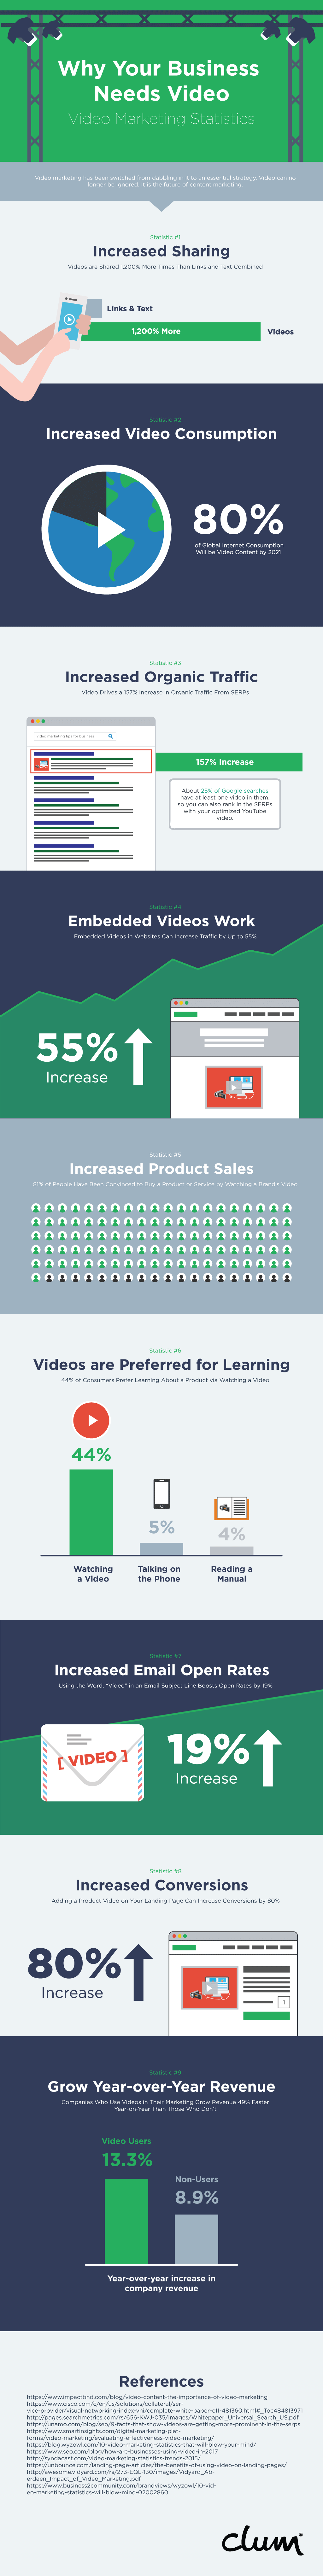 Video Marketing Statistics: Why Your Business Needs Video